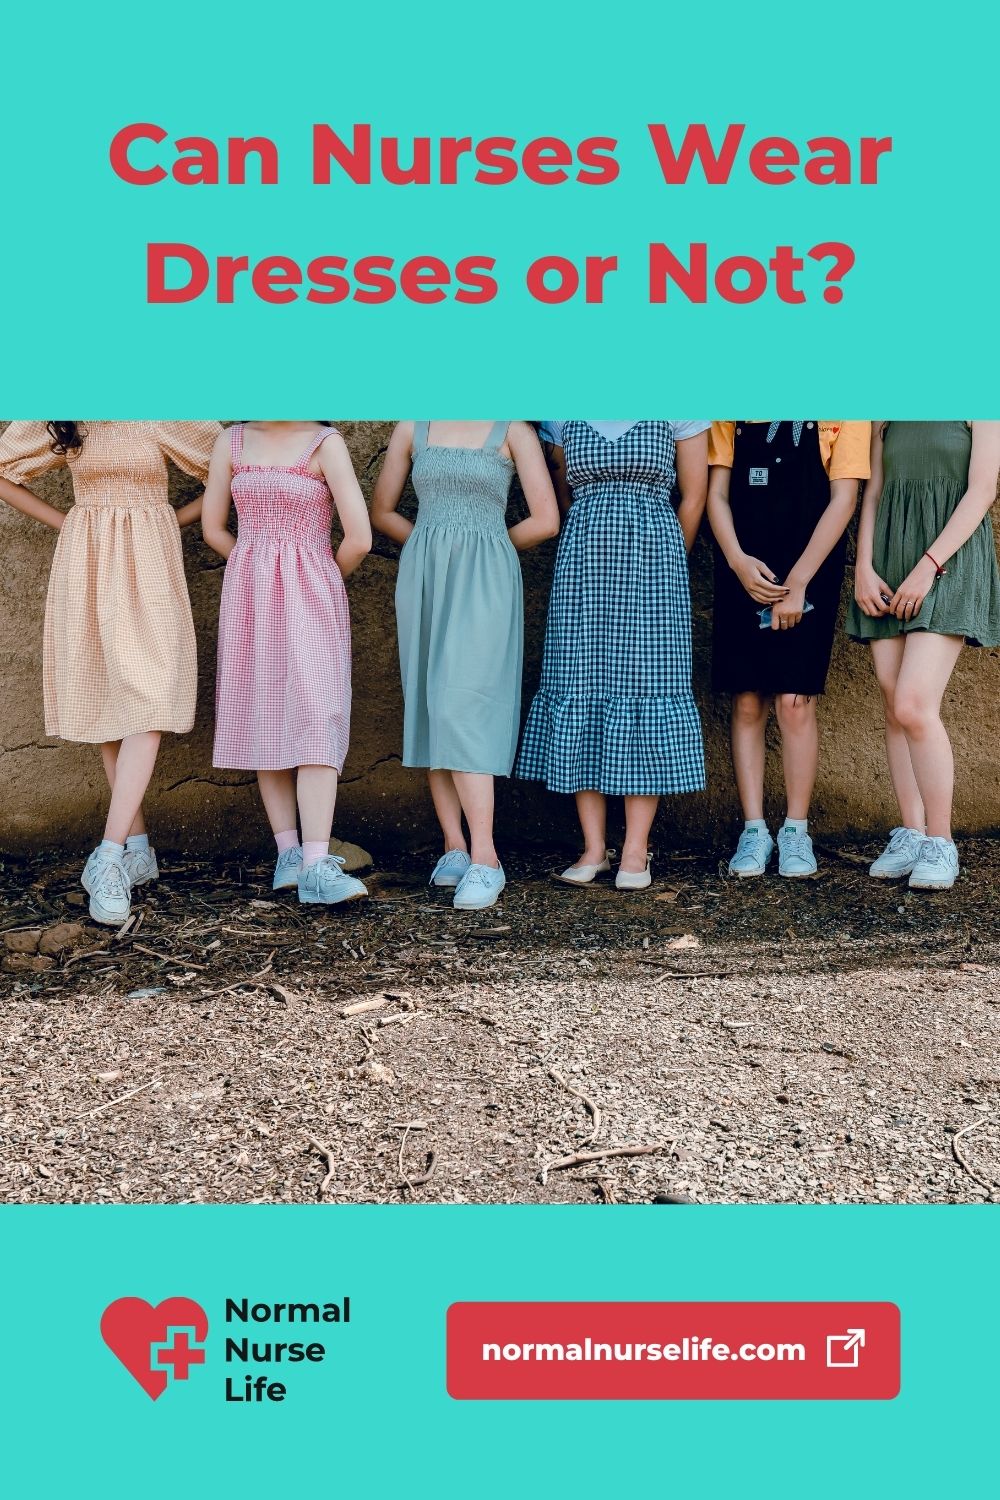 Can nurses wear dresses or not